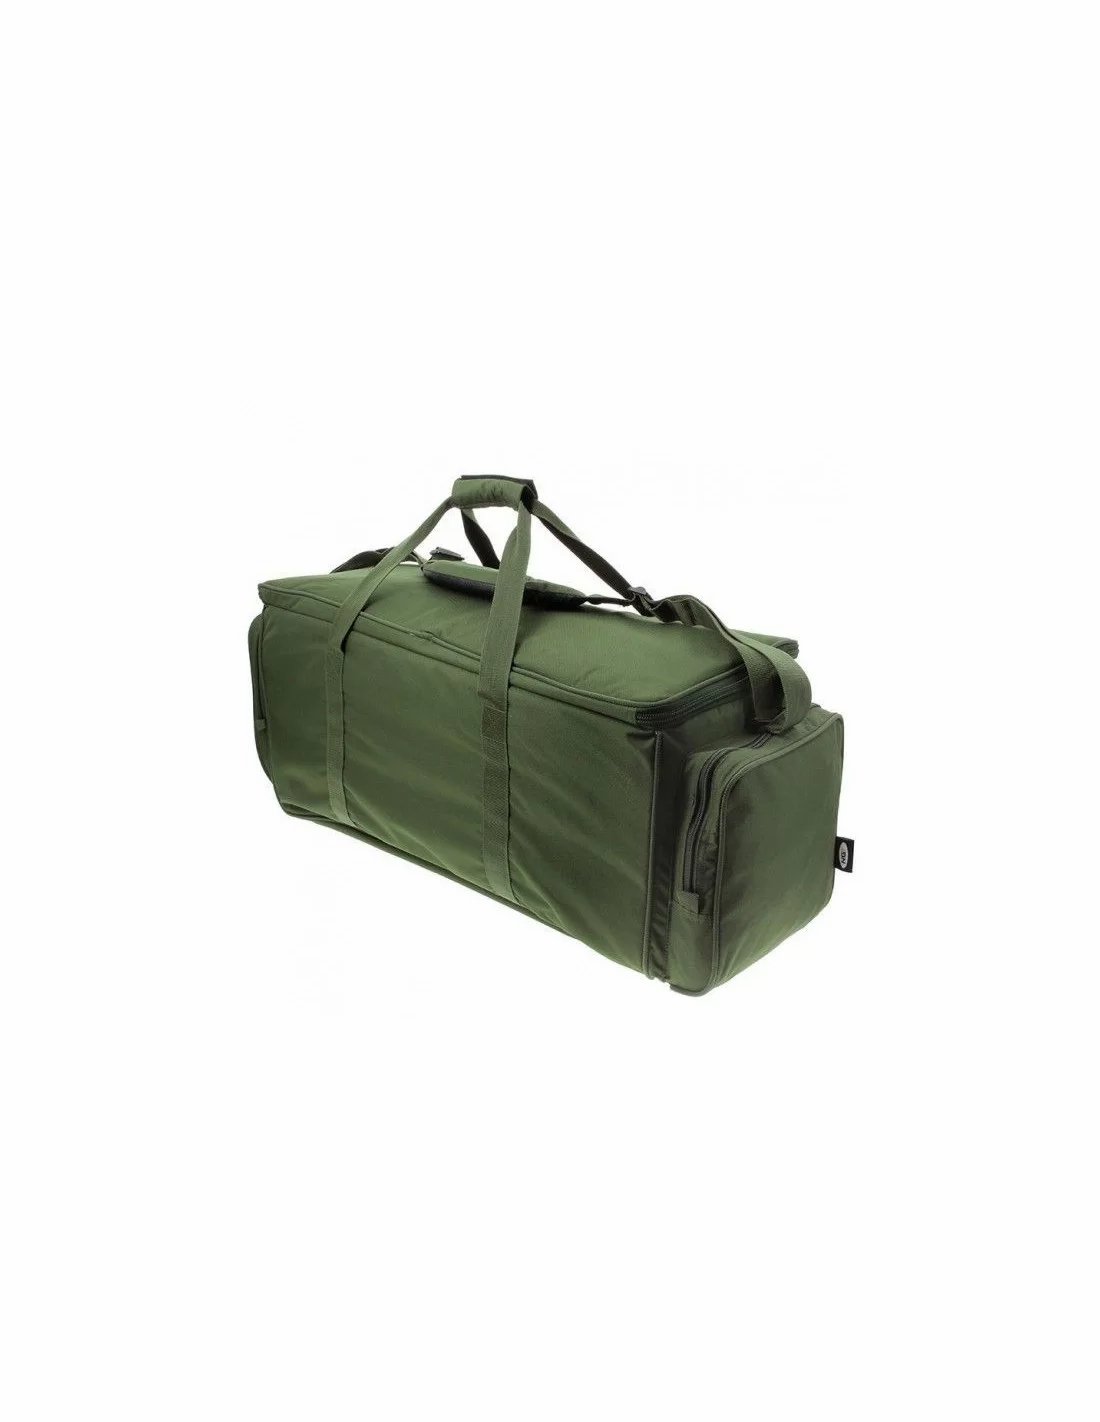 NGT Giant Green Insulated Carryall 709-L хладилна чанта-сак